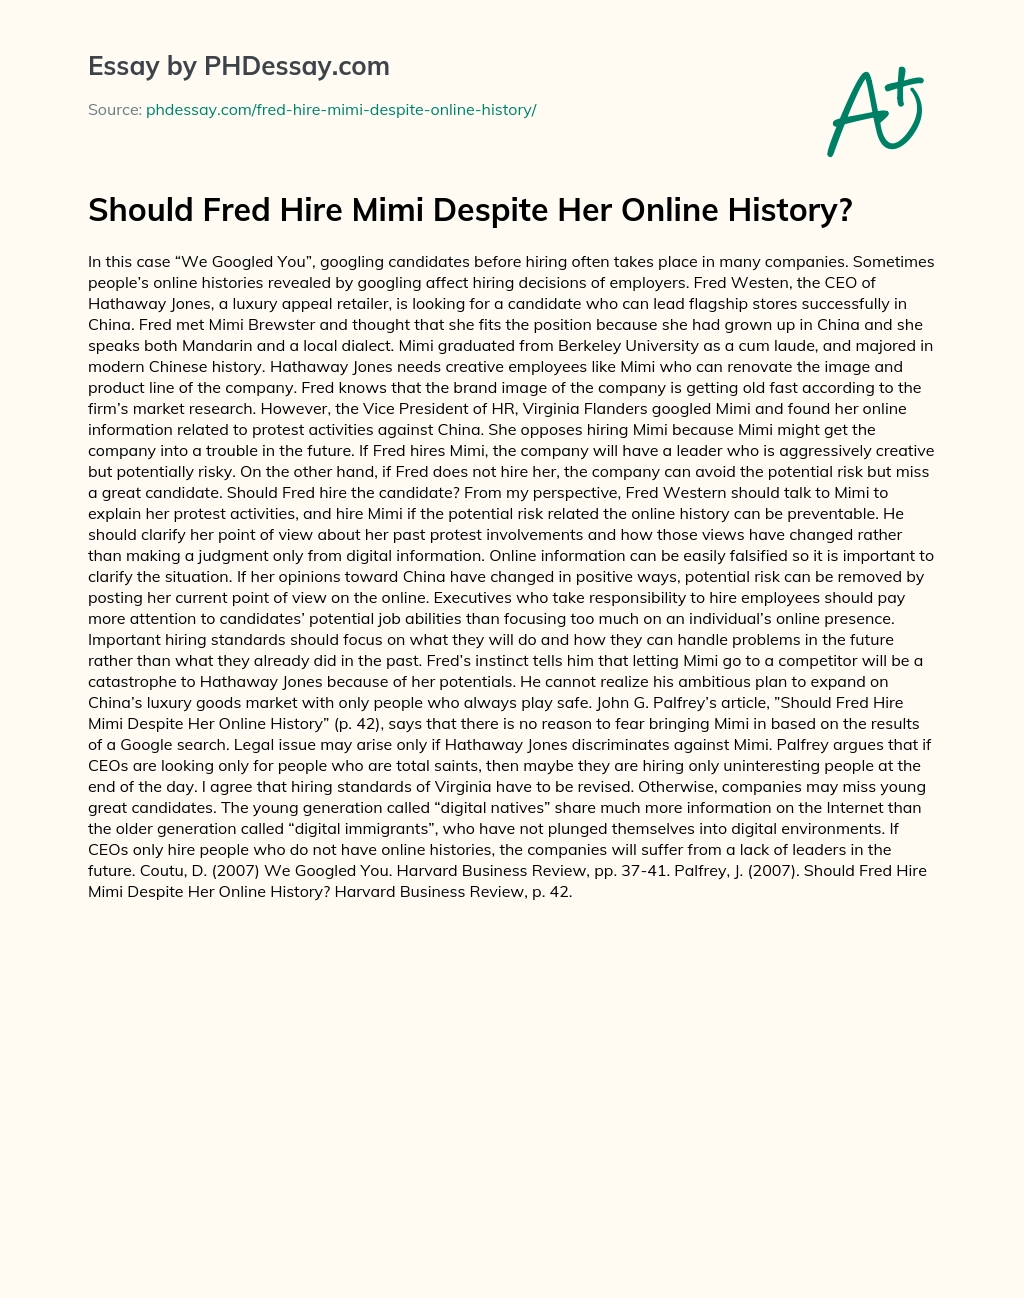 Should Fred Hire Mimi Despite Her Online History? essay